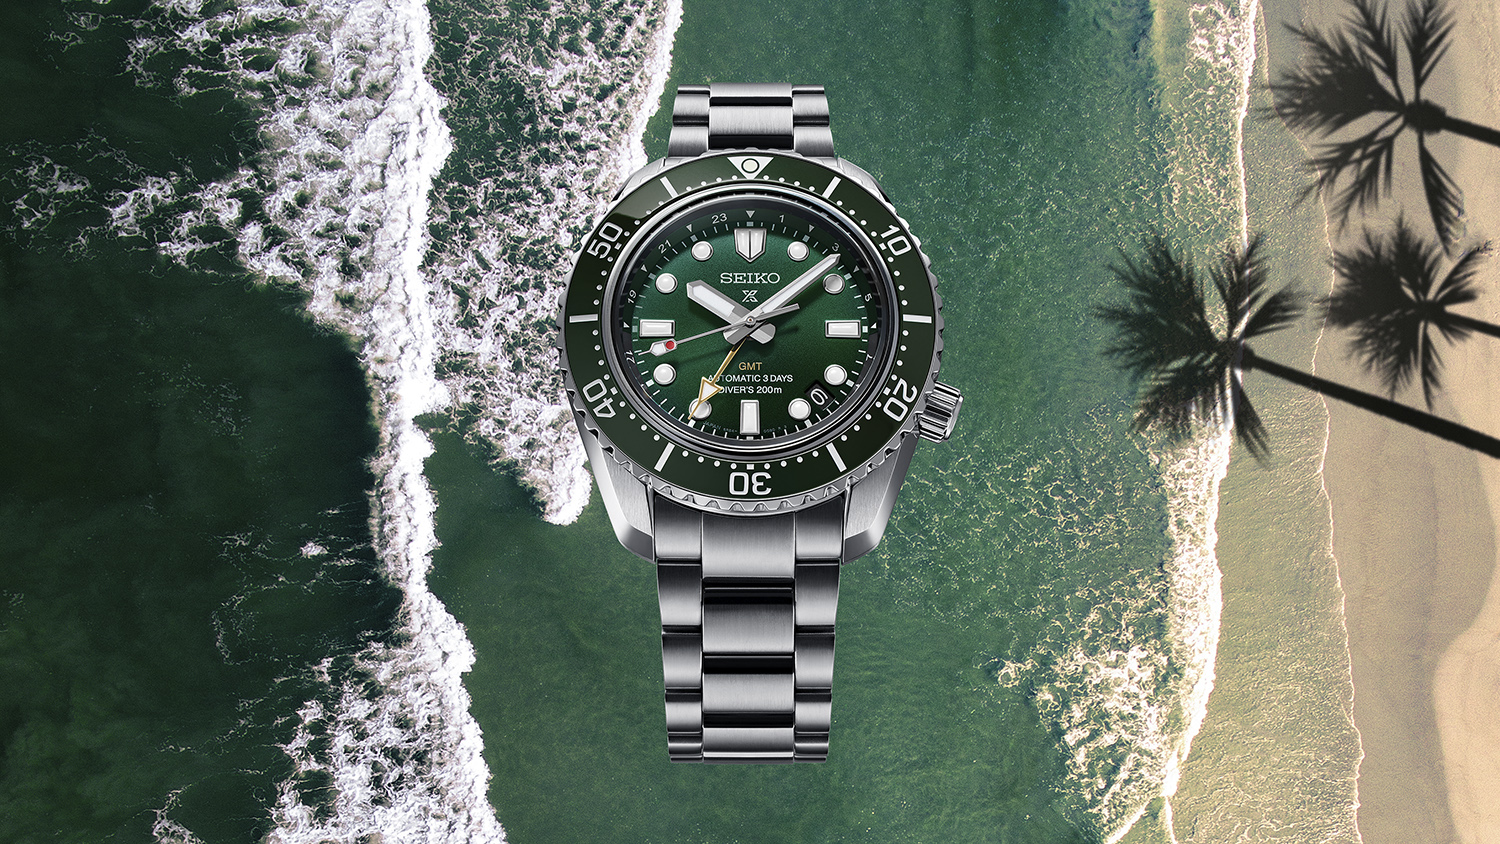 Powered by a new movement, a mechanical GMT diver's watch the Seiko Prospex collection for the first time. | Seiko Watch